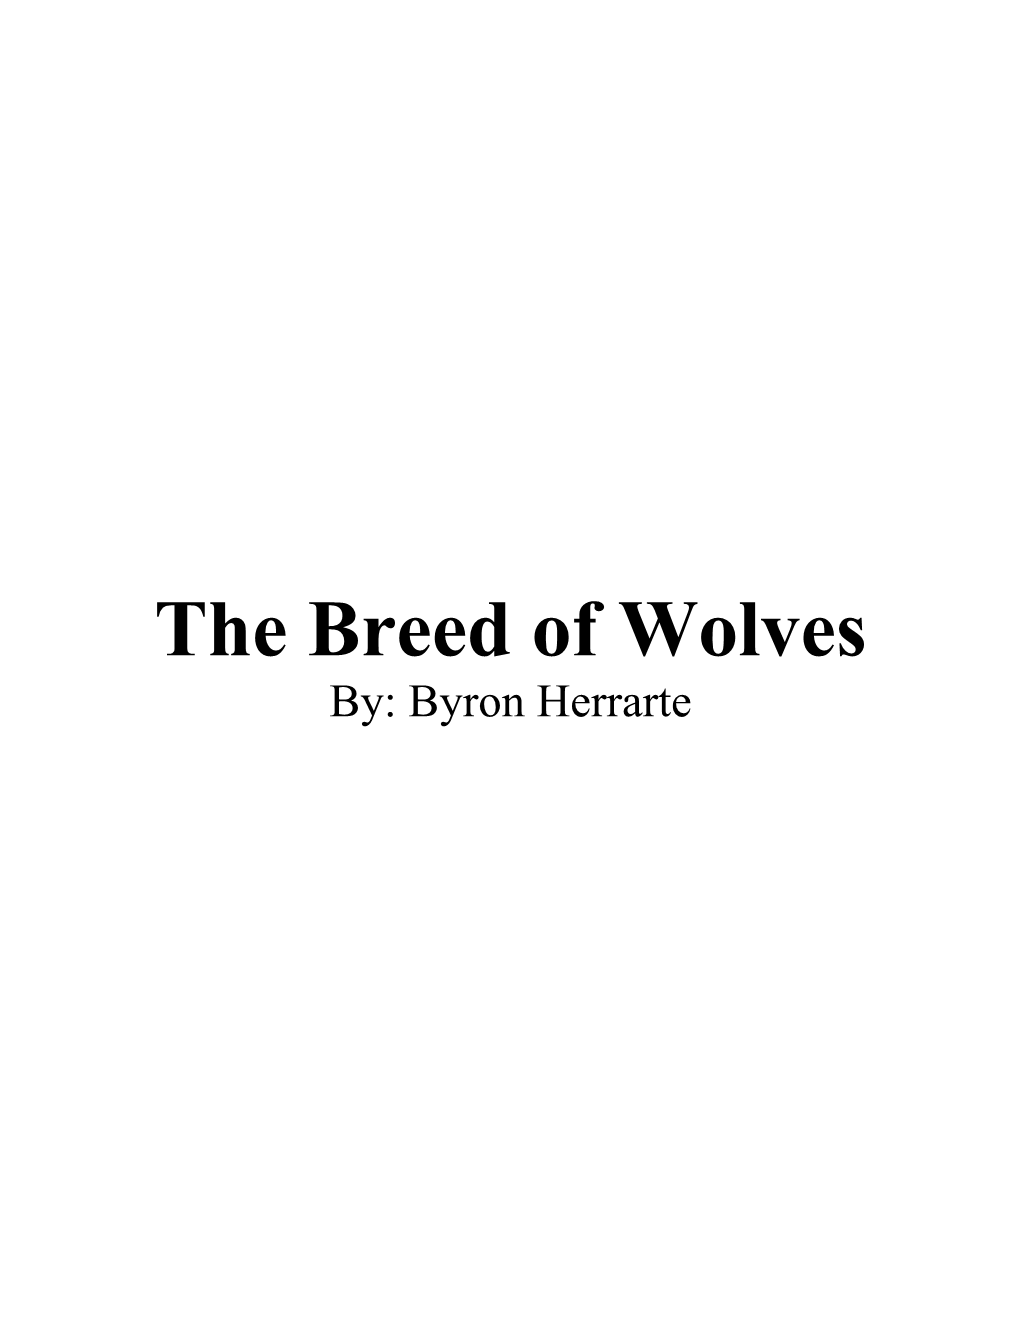 The Breed of Wolves